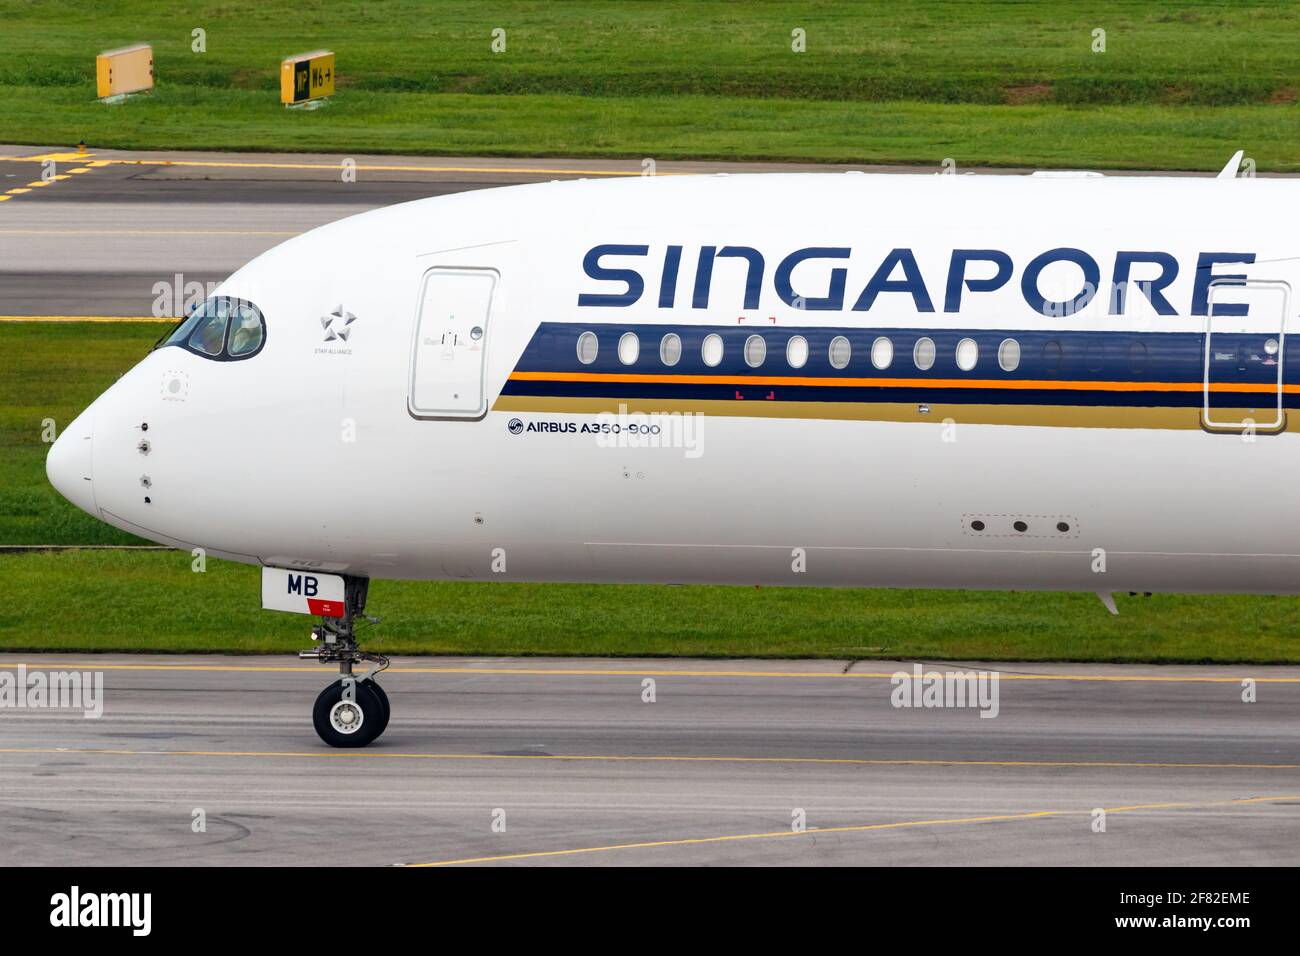 Changi, Singapore – January 29, 2018: Singapore Airlines Airbus A350 airplane at Changi airport (SIN) in Singapore. Airbus is a European aircraft manu Stock Photo